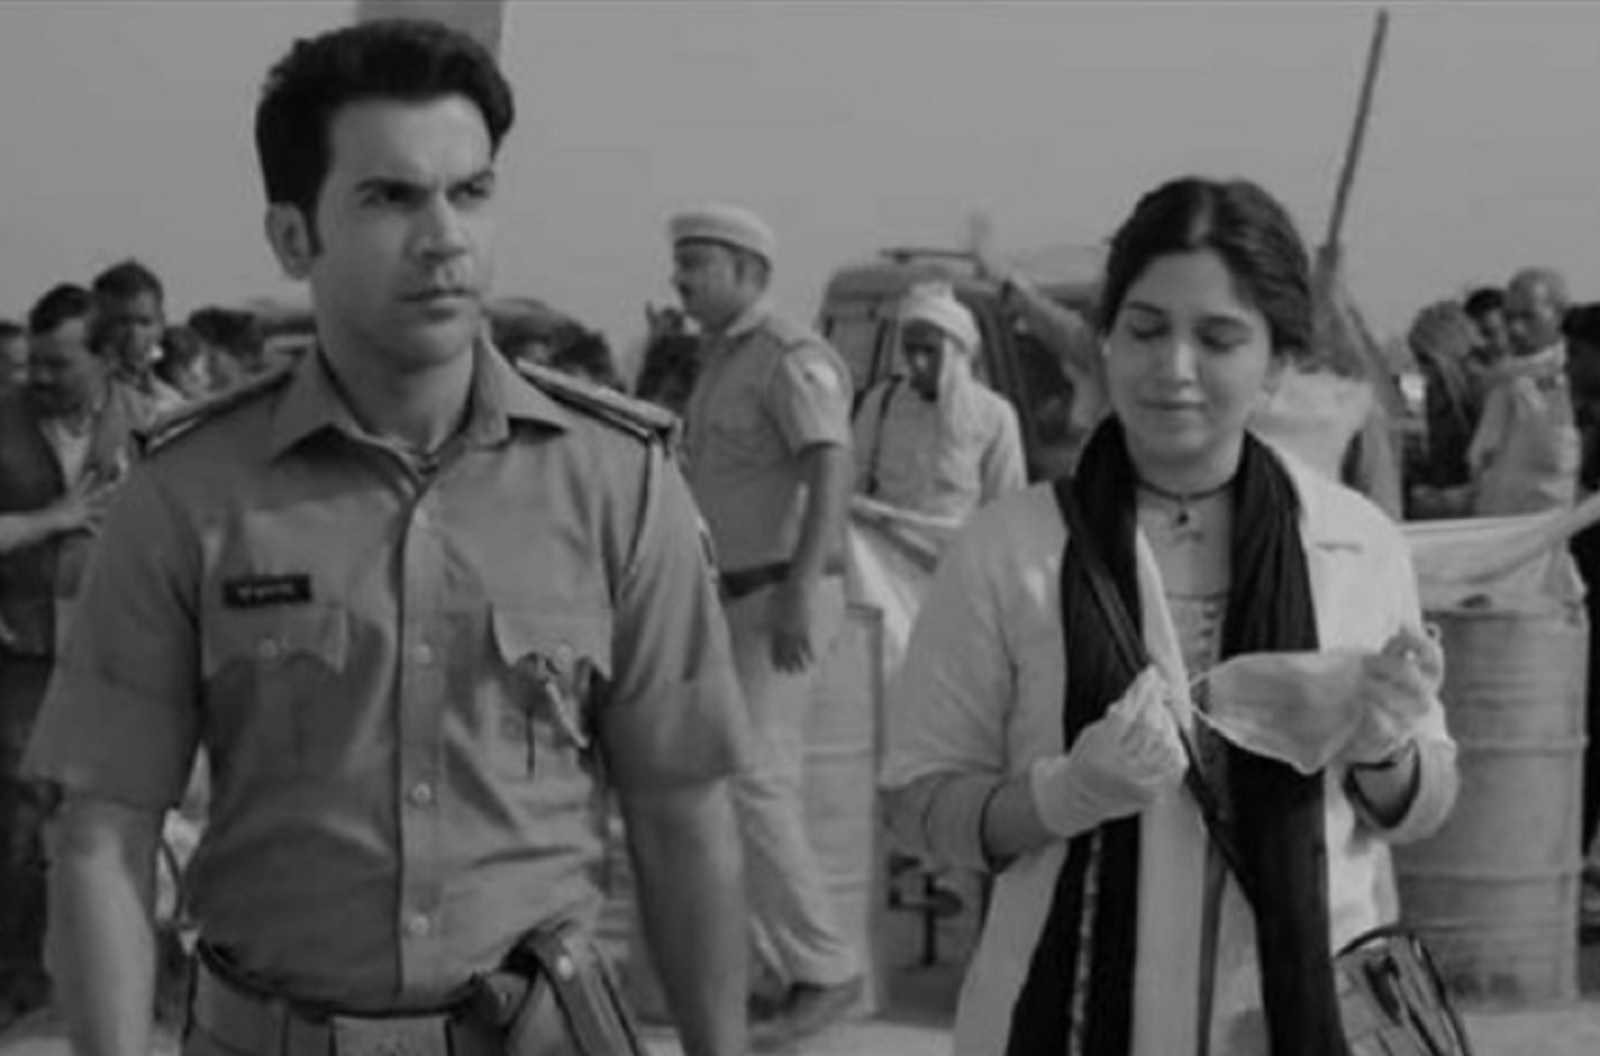 Bheed Twitter review: Rajkummar Rao, Bhumi Pednekar starrer being hailed as 'powerful and important' by netizens